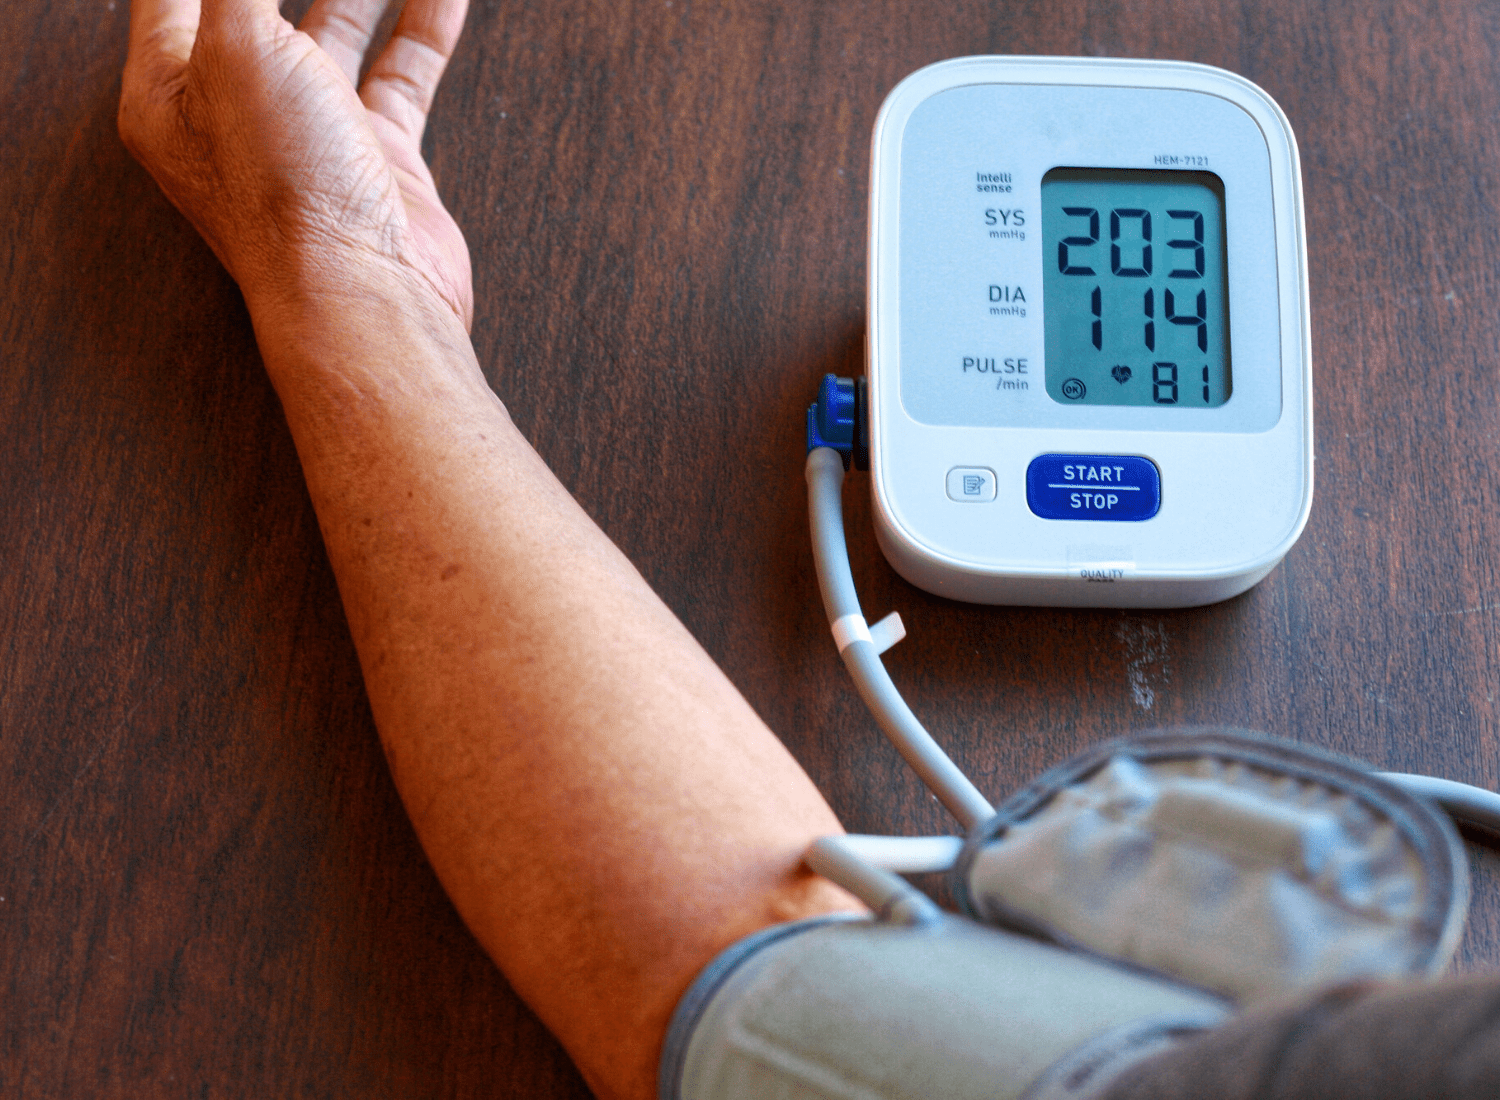 Are You Struggling With High Blood Sugar Levels?